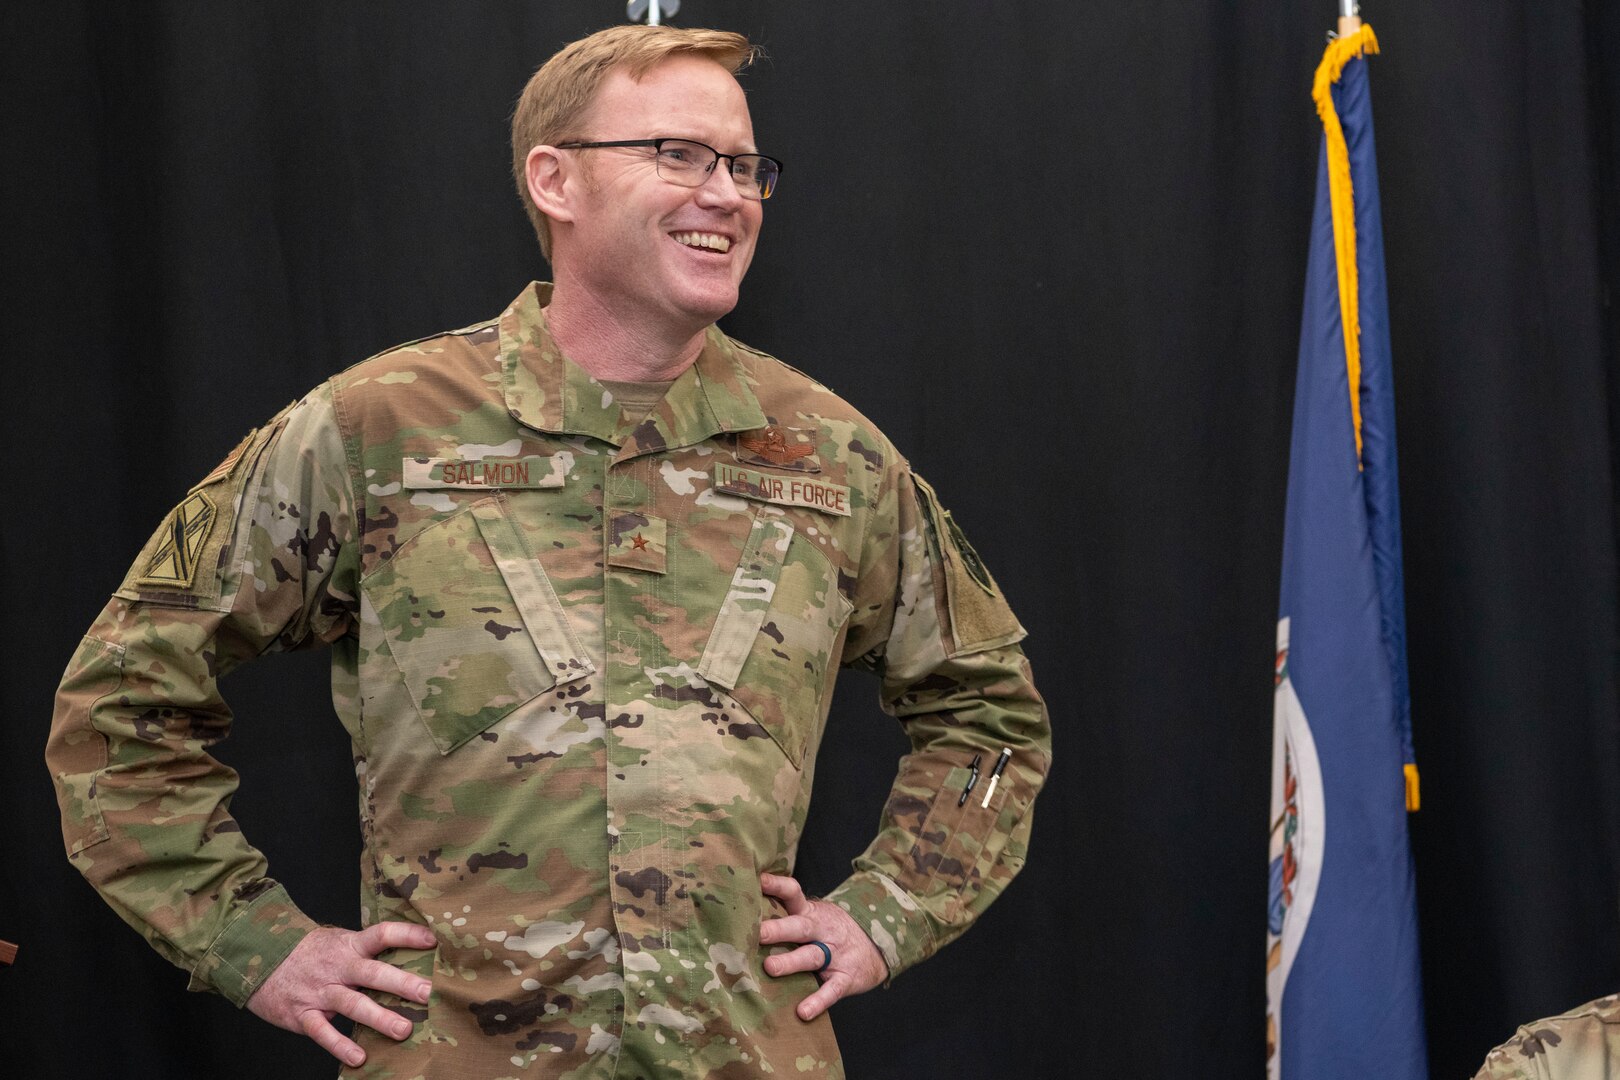 Brig. Gen. Bryan E. Salmon, the Assistant Adjutant General for ANG Strategic Initiatives, stands with his hands on his hips as he addresses members of the 856th Cyber Protection Team at an end of mobilization ceremony Feb. 25, 2022, in Hampton, Virginia.